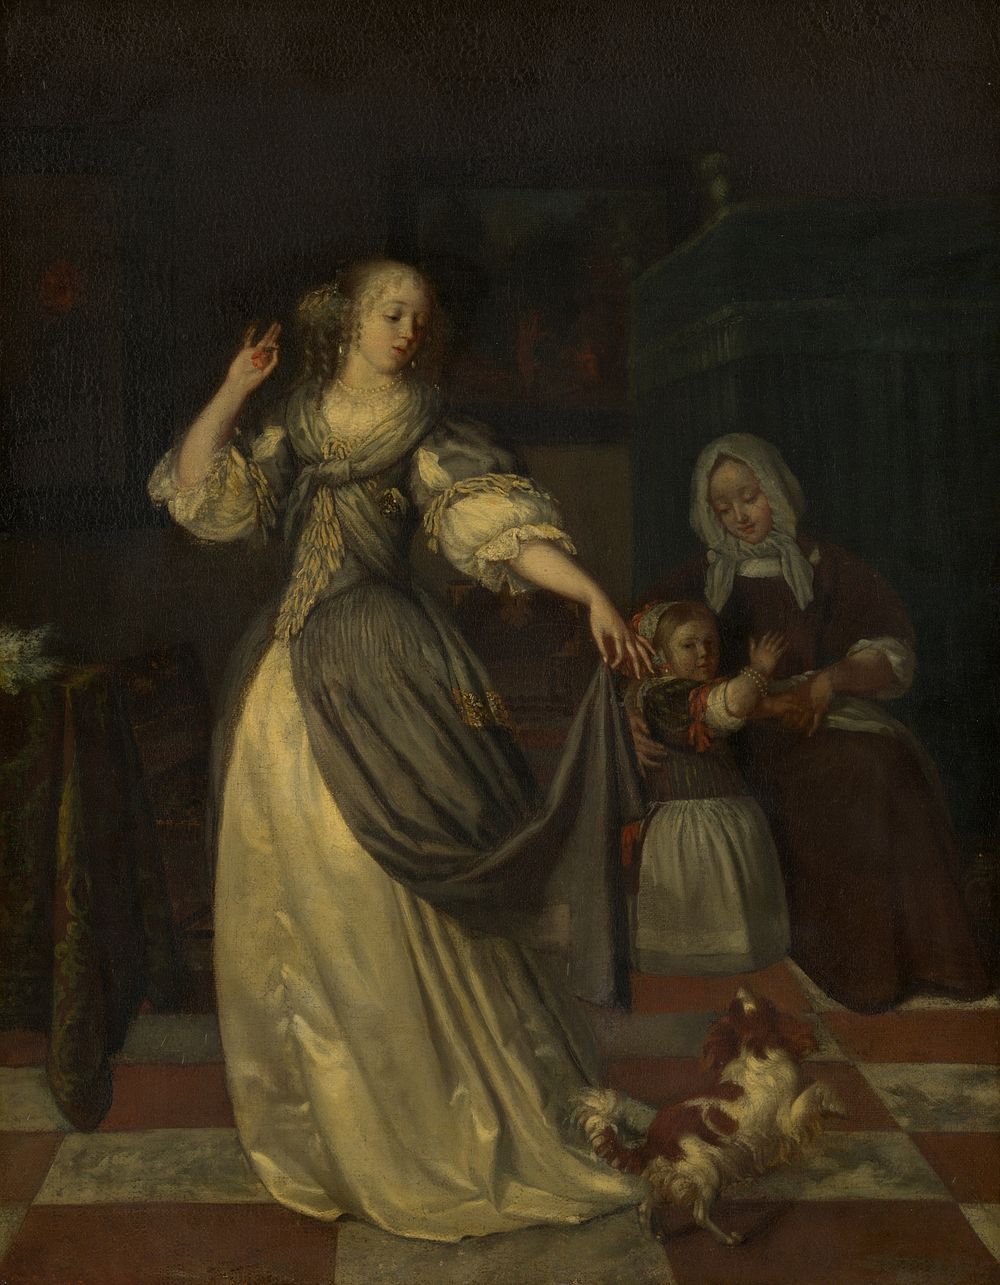 Lady Playing with a Dog by Eglon van der Neer